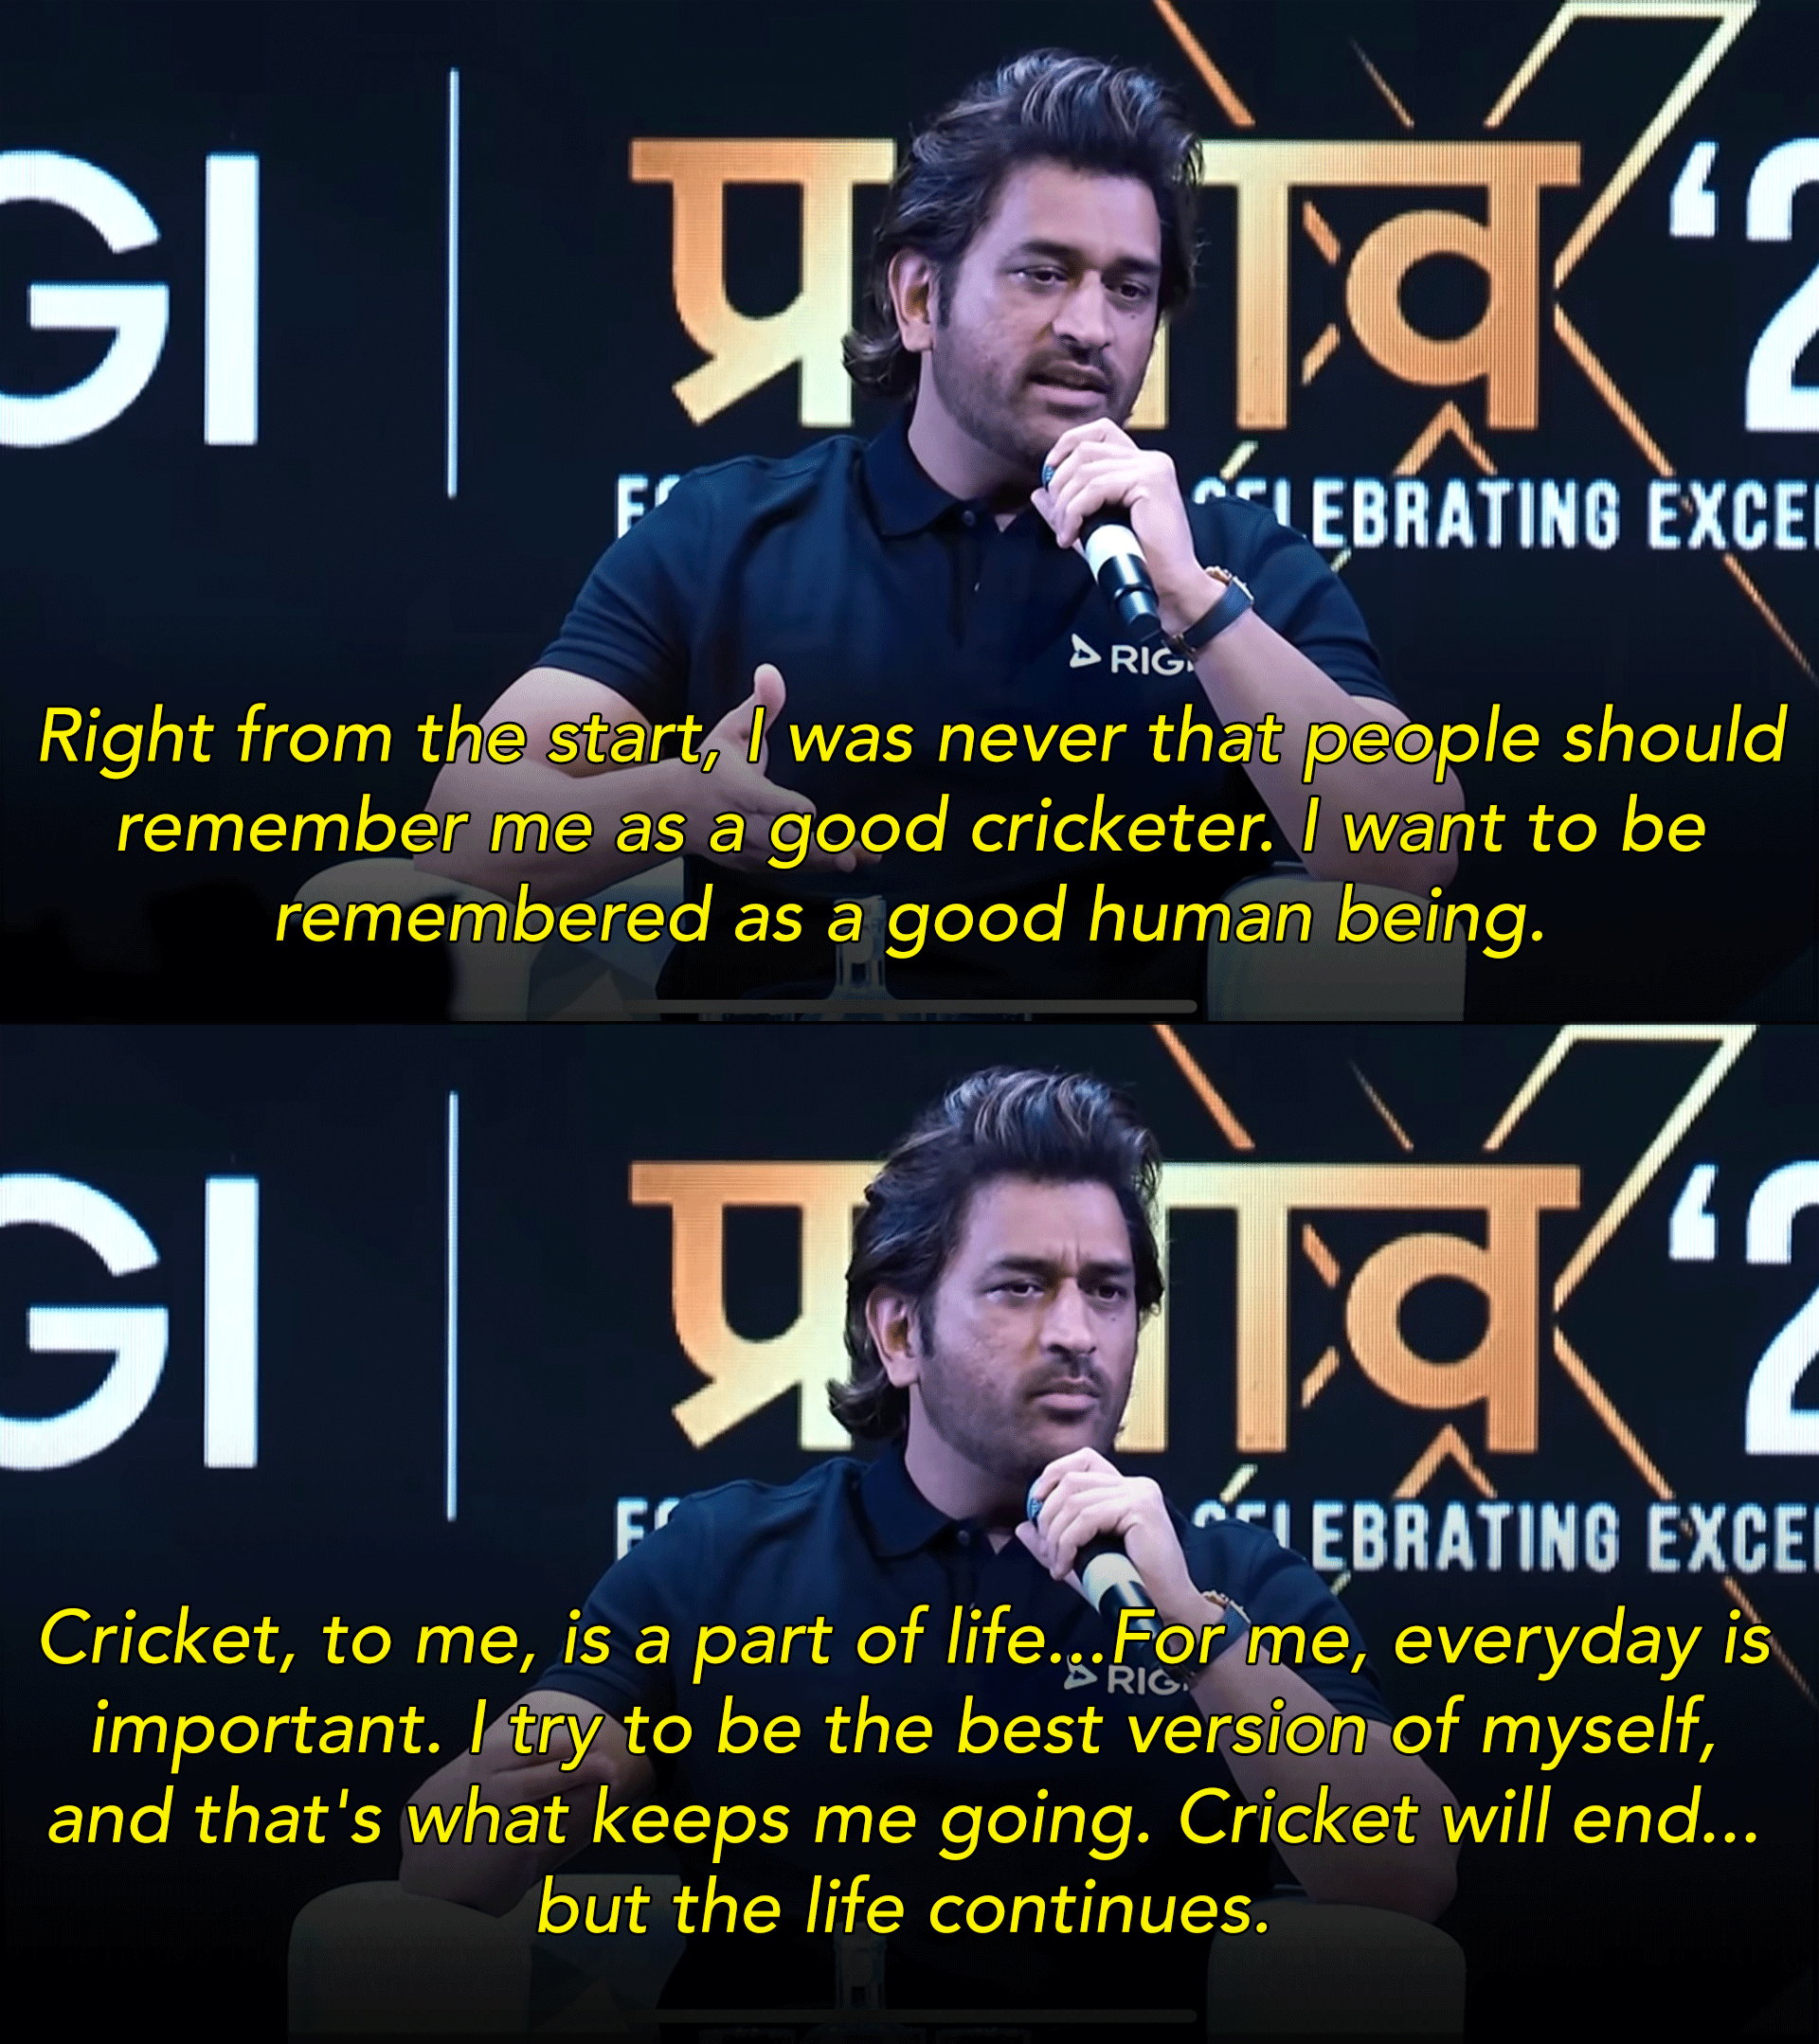 MS Dhoni shares his cricket experience insights